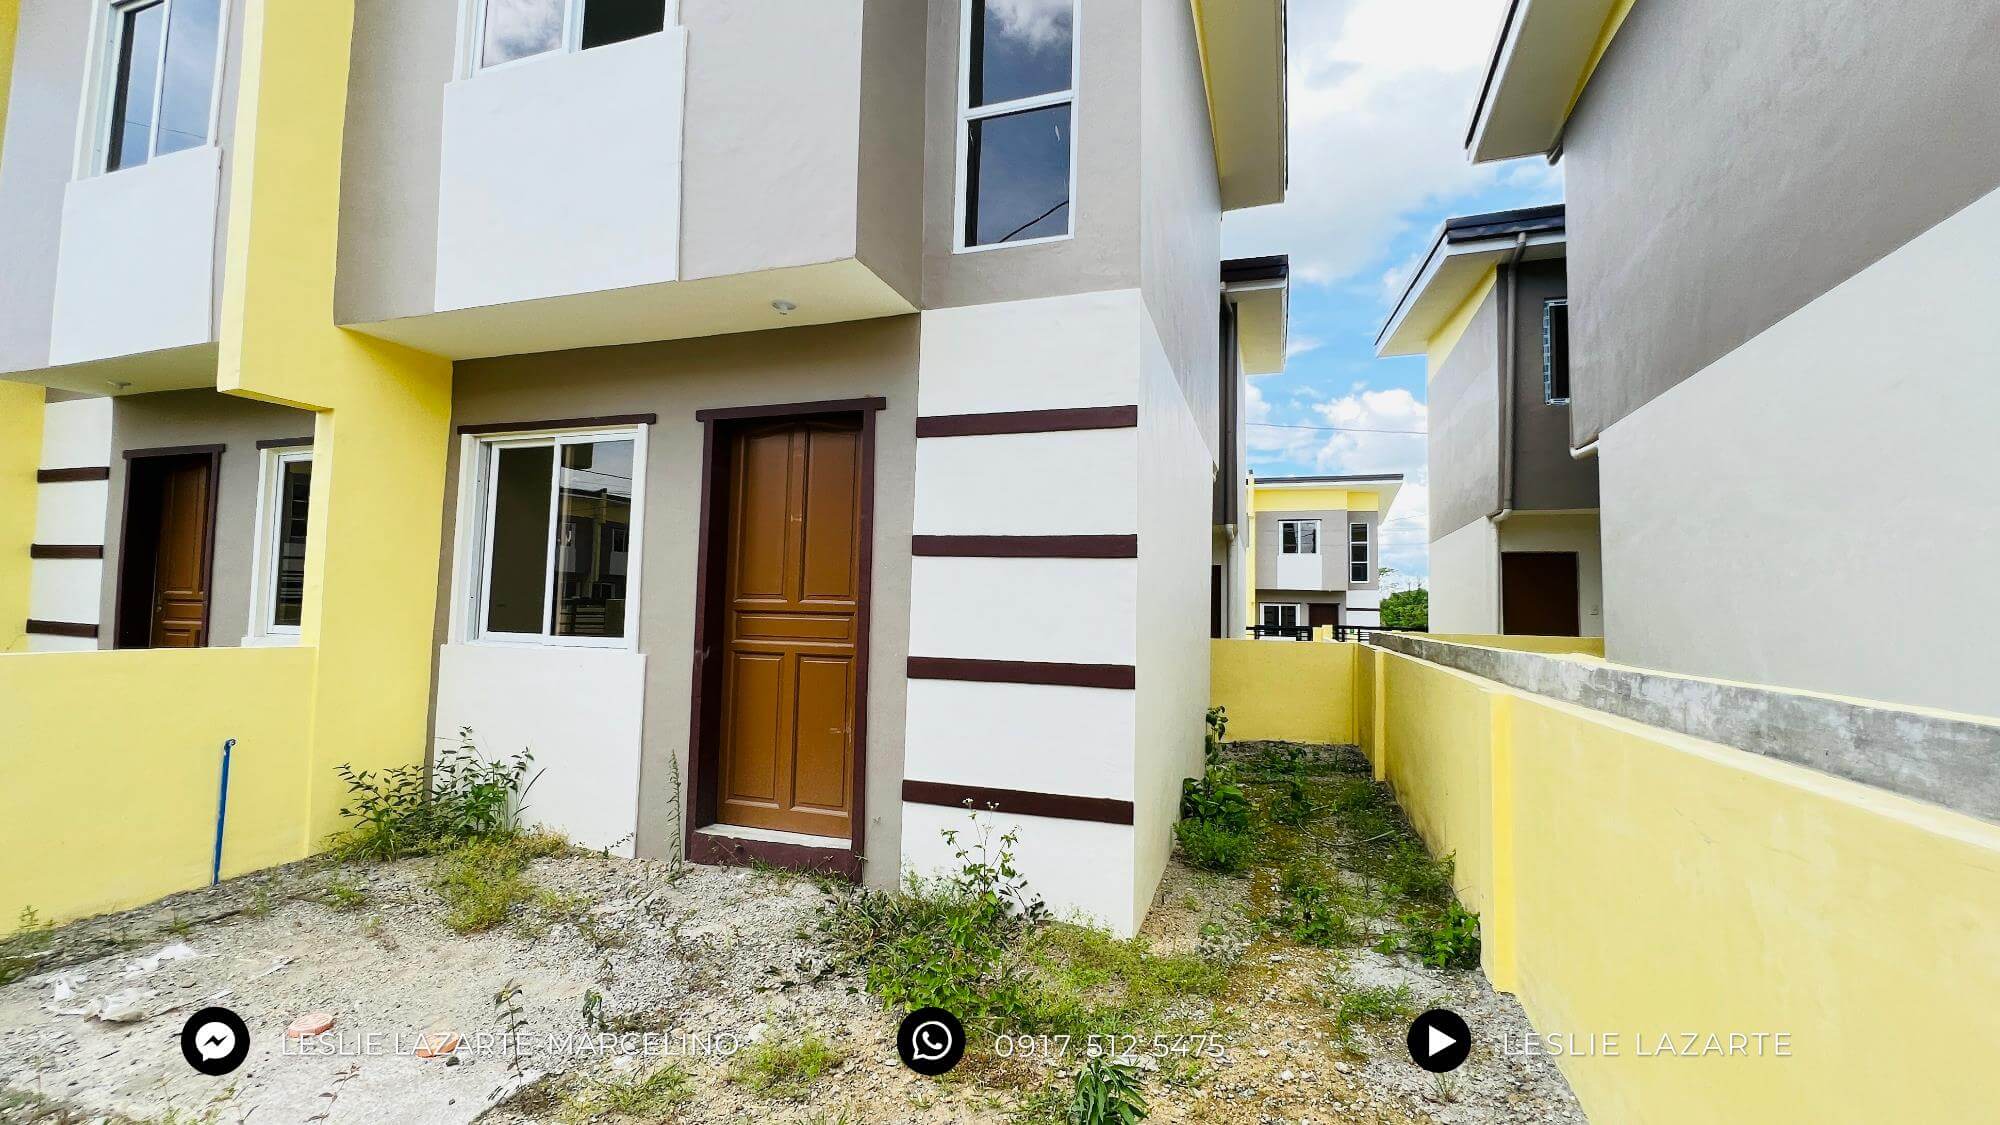 Photo of Pacifictown Executive Village - Townhouse End | House and Lot for Sale Pag-IBIG Trece Martires Cavite | Pacifictown Property Ventures Inc